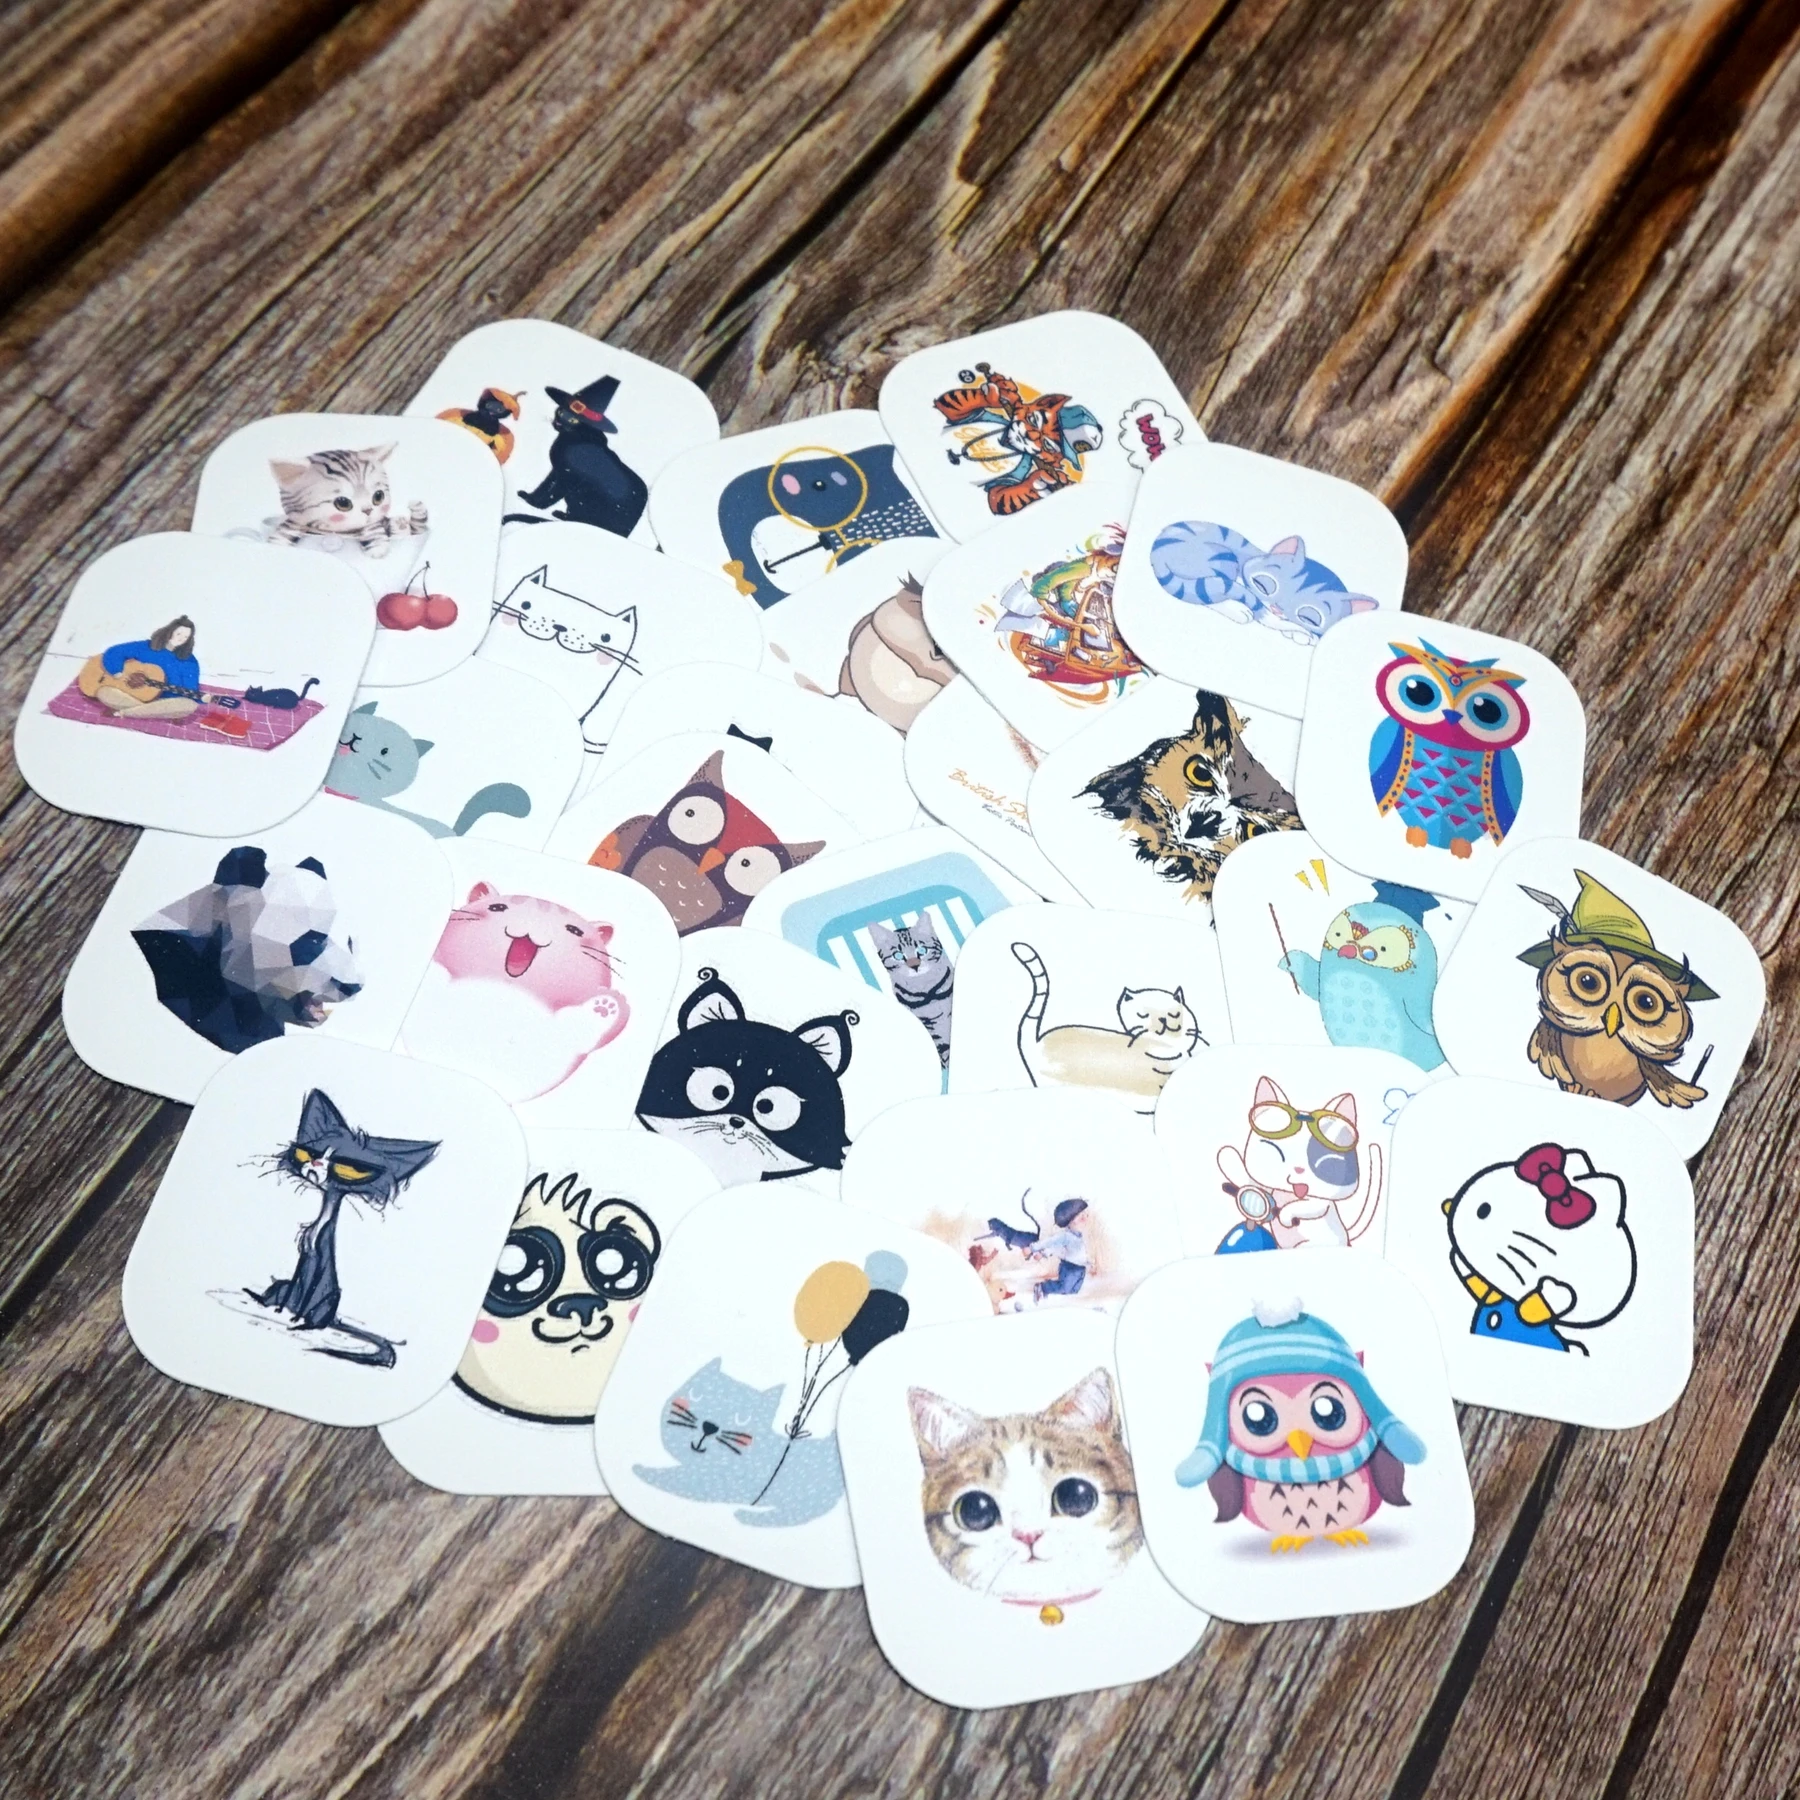 32pcs Cute Cartoon Animals Waterproof Stickers Kids Students Gift Sitickers DIY Scrapbooking Stationery Diary Stickers